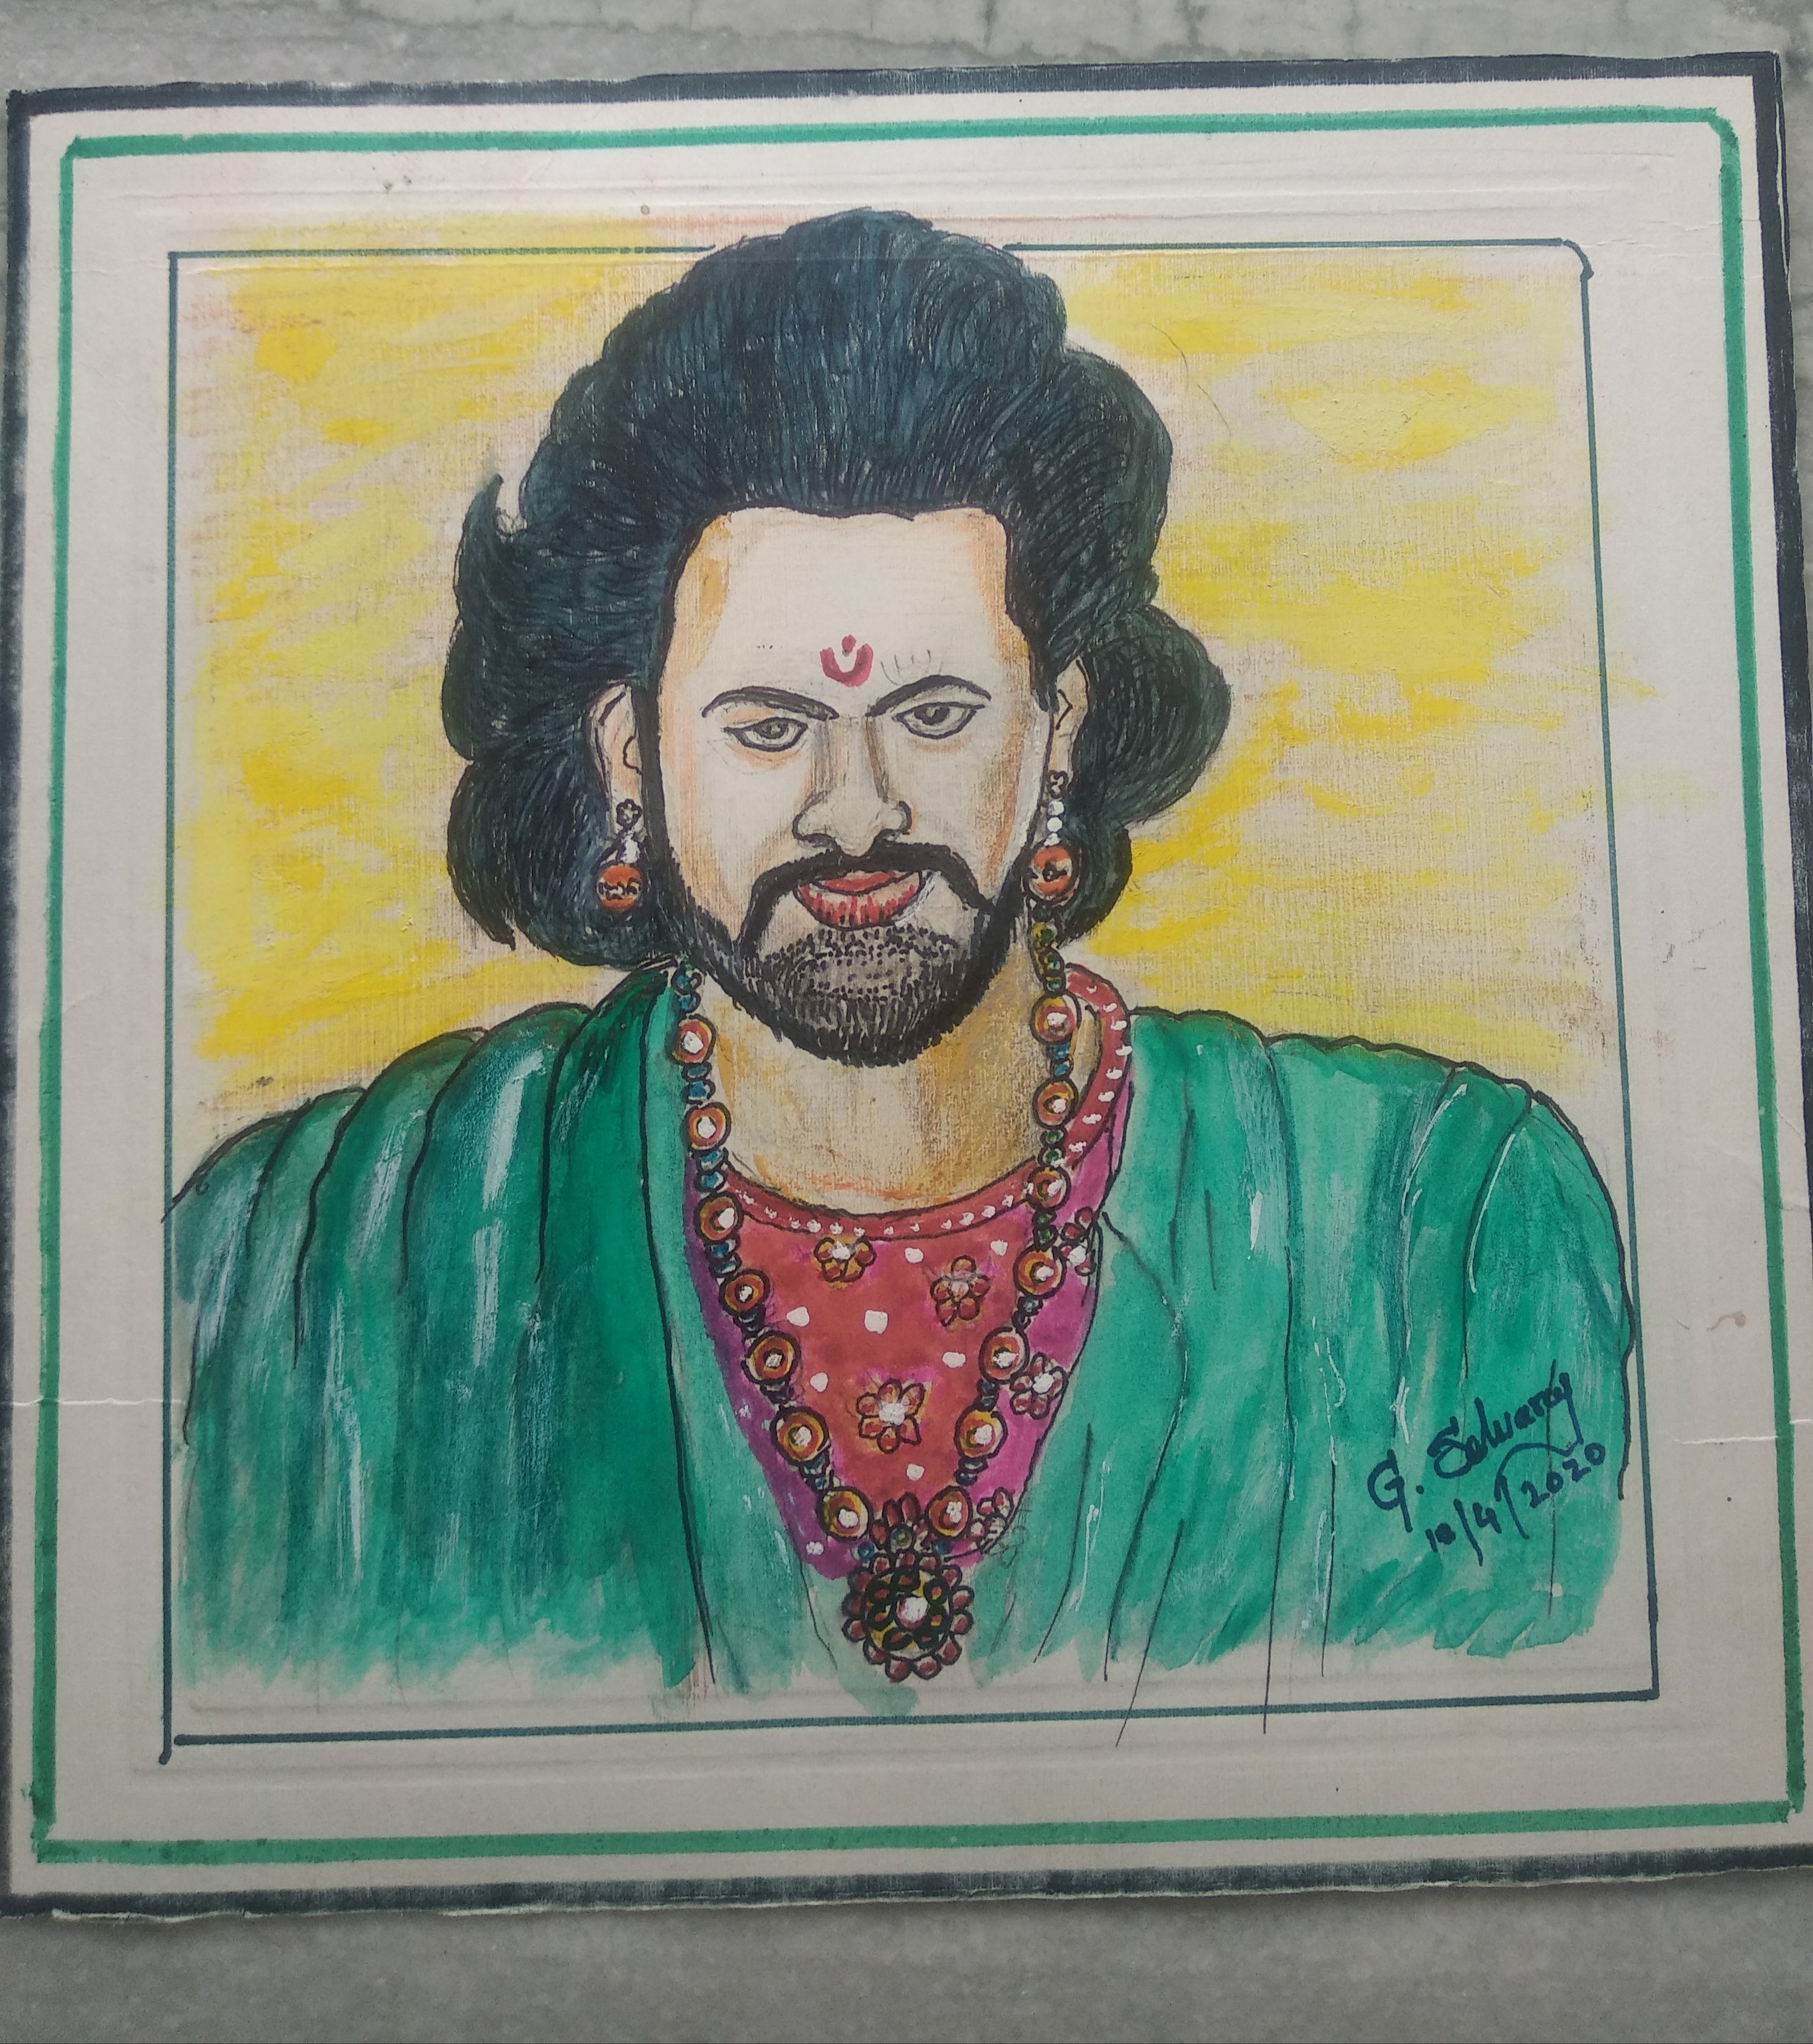 Prabhas With Shivling Drawing Easy With Oil Pastels | Bahubali Shivling  Scene | Shivratri Drawing - YouTube